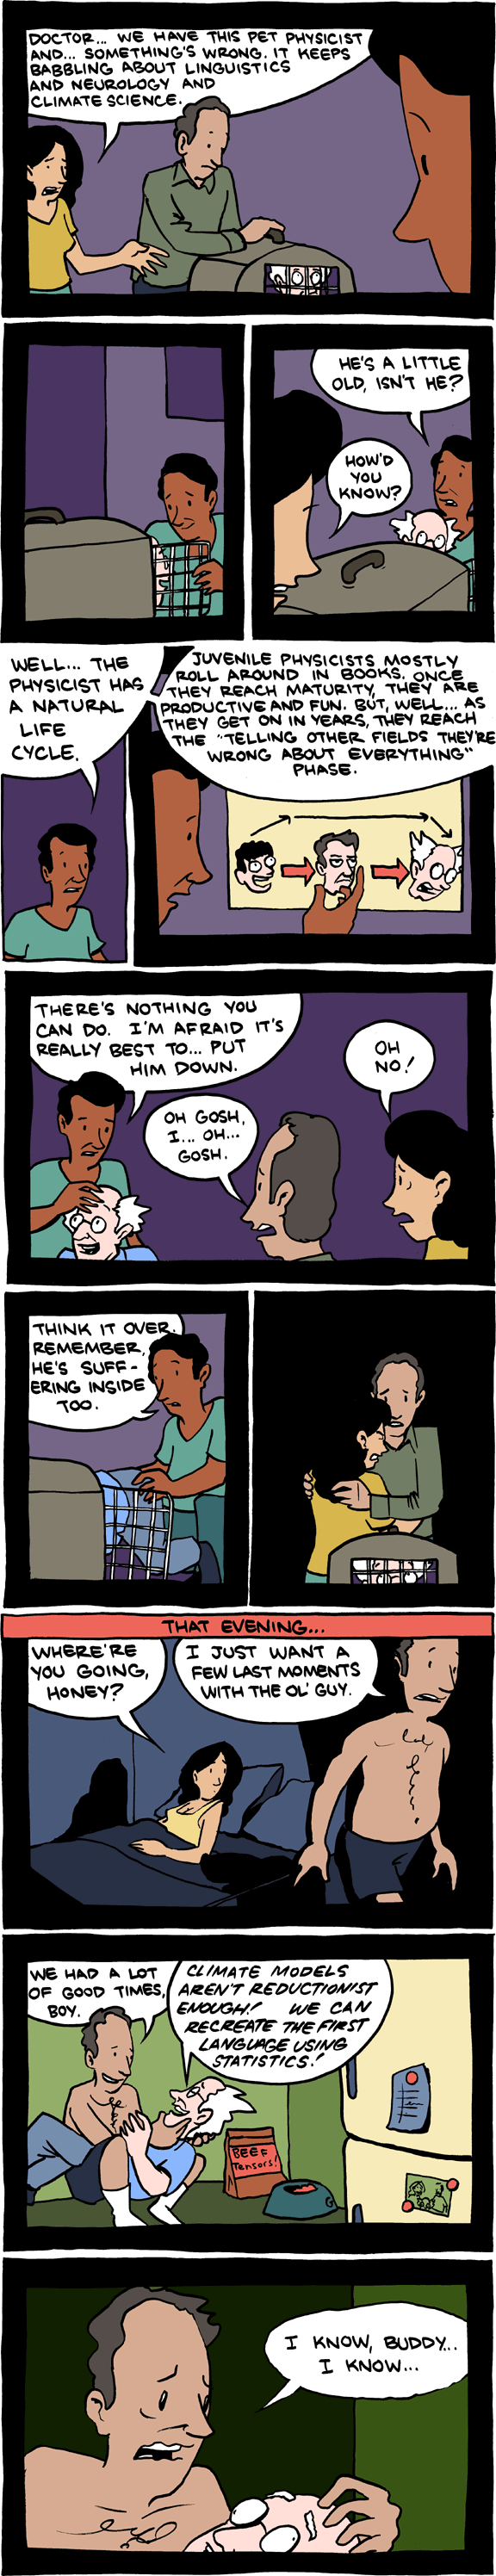 A comic that makes fun about how physicists when they get older inevitably have to be smartasses in other fields.